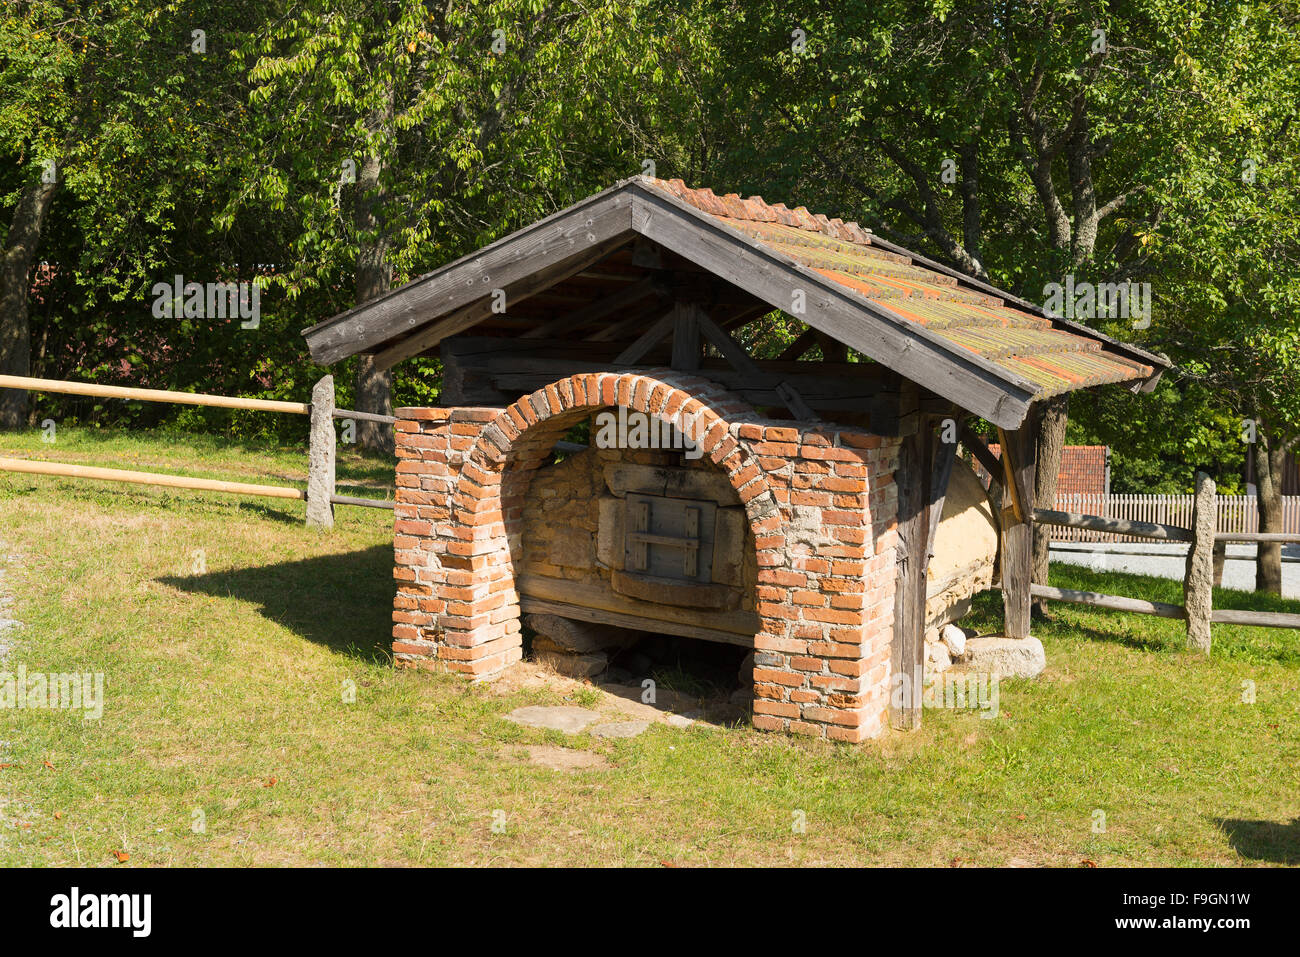 Oven, Finsterau open-air museum, Lower Bavaria, Germany Stock Photo